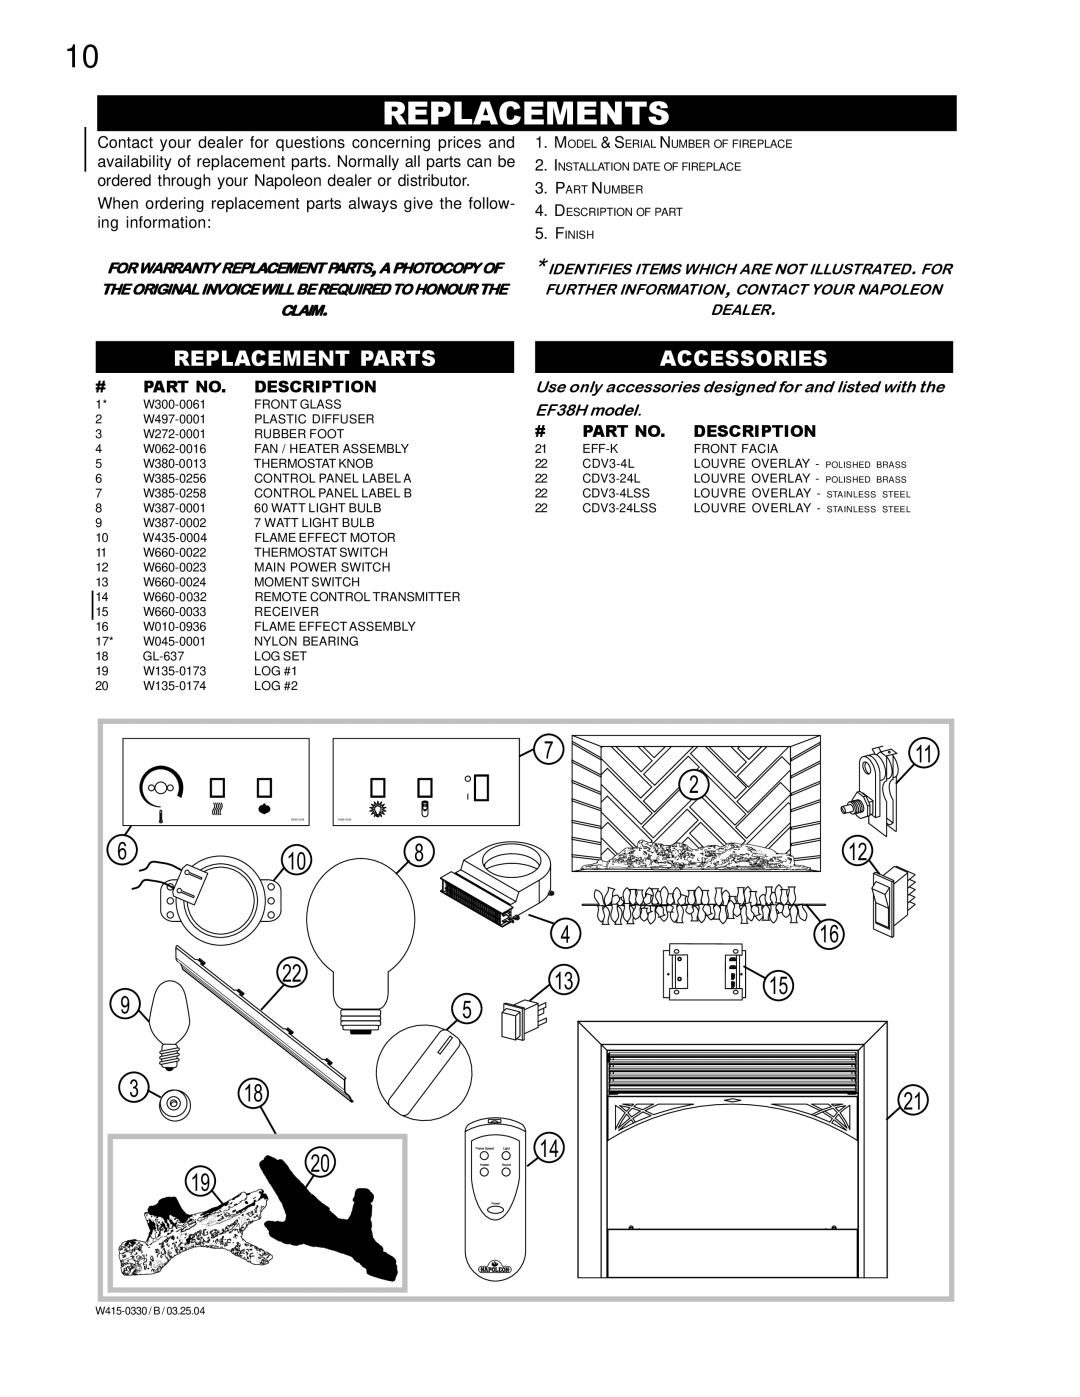 Napoleon Fireplaces EF38H manual Replacements, Replacement Parts, Accessories 